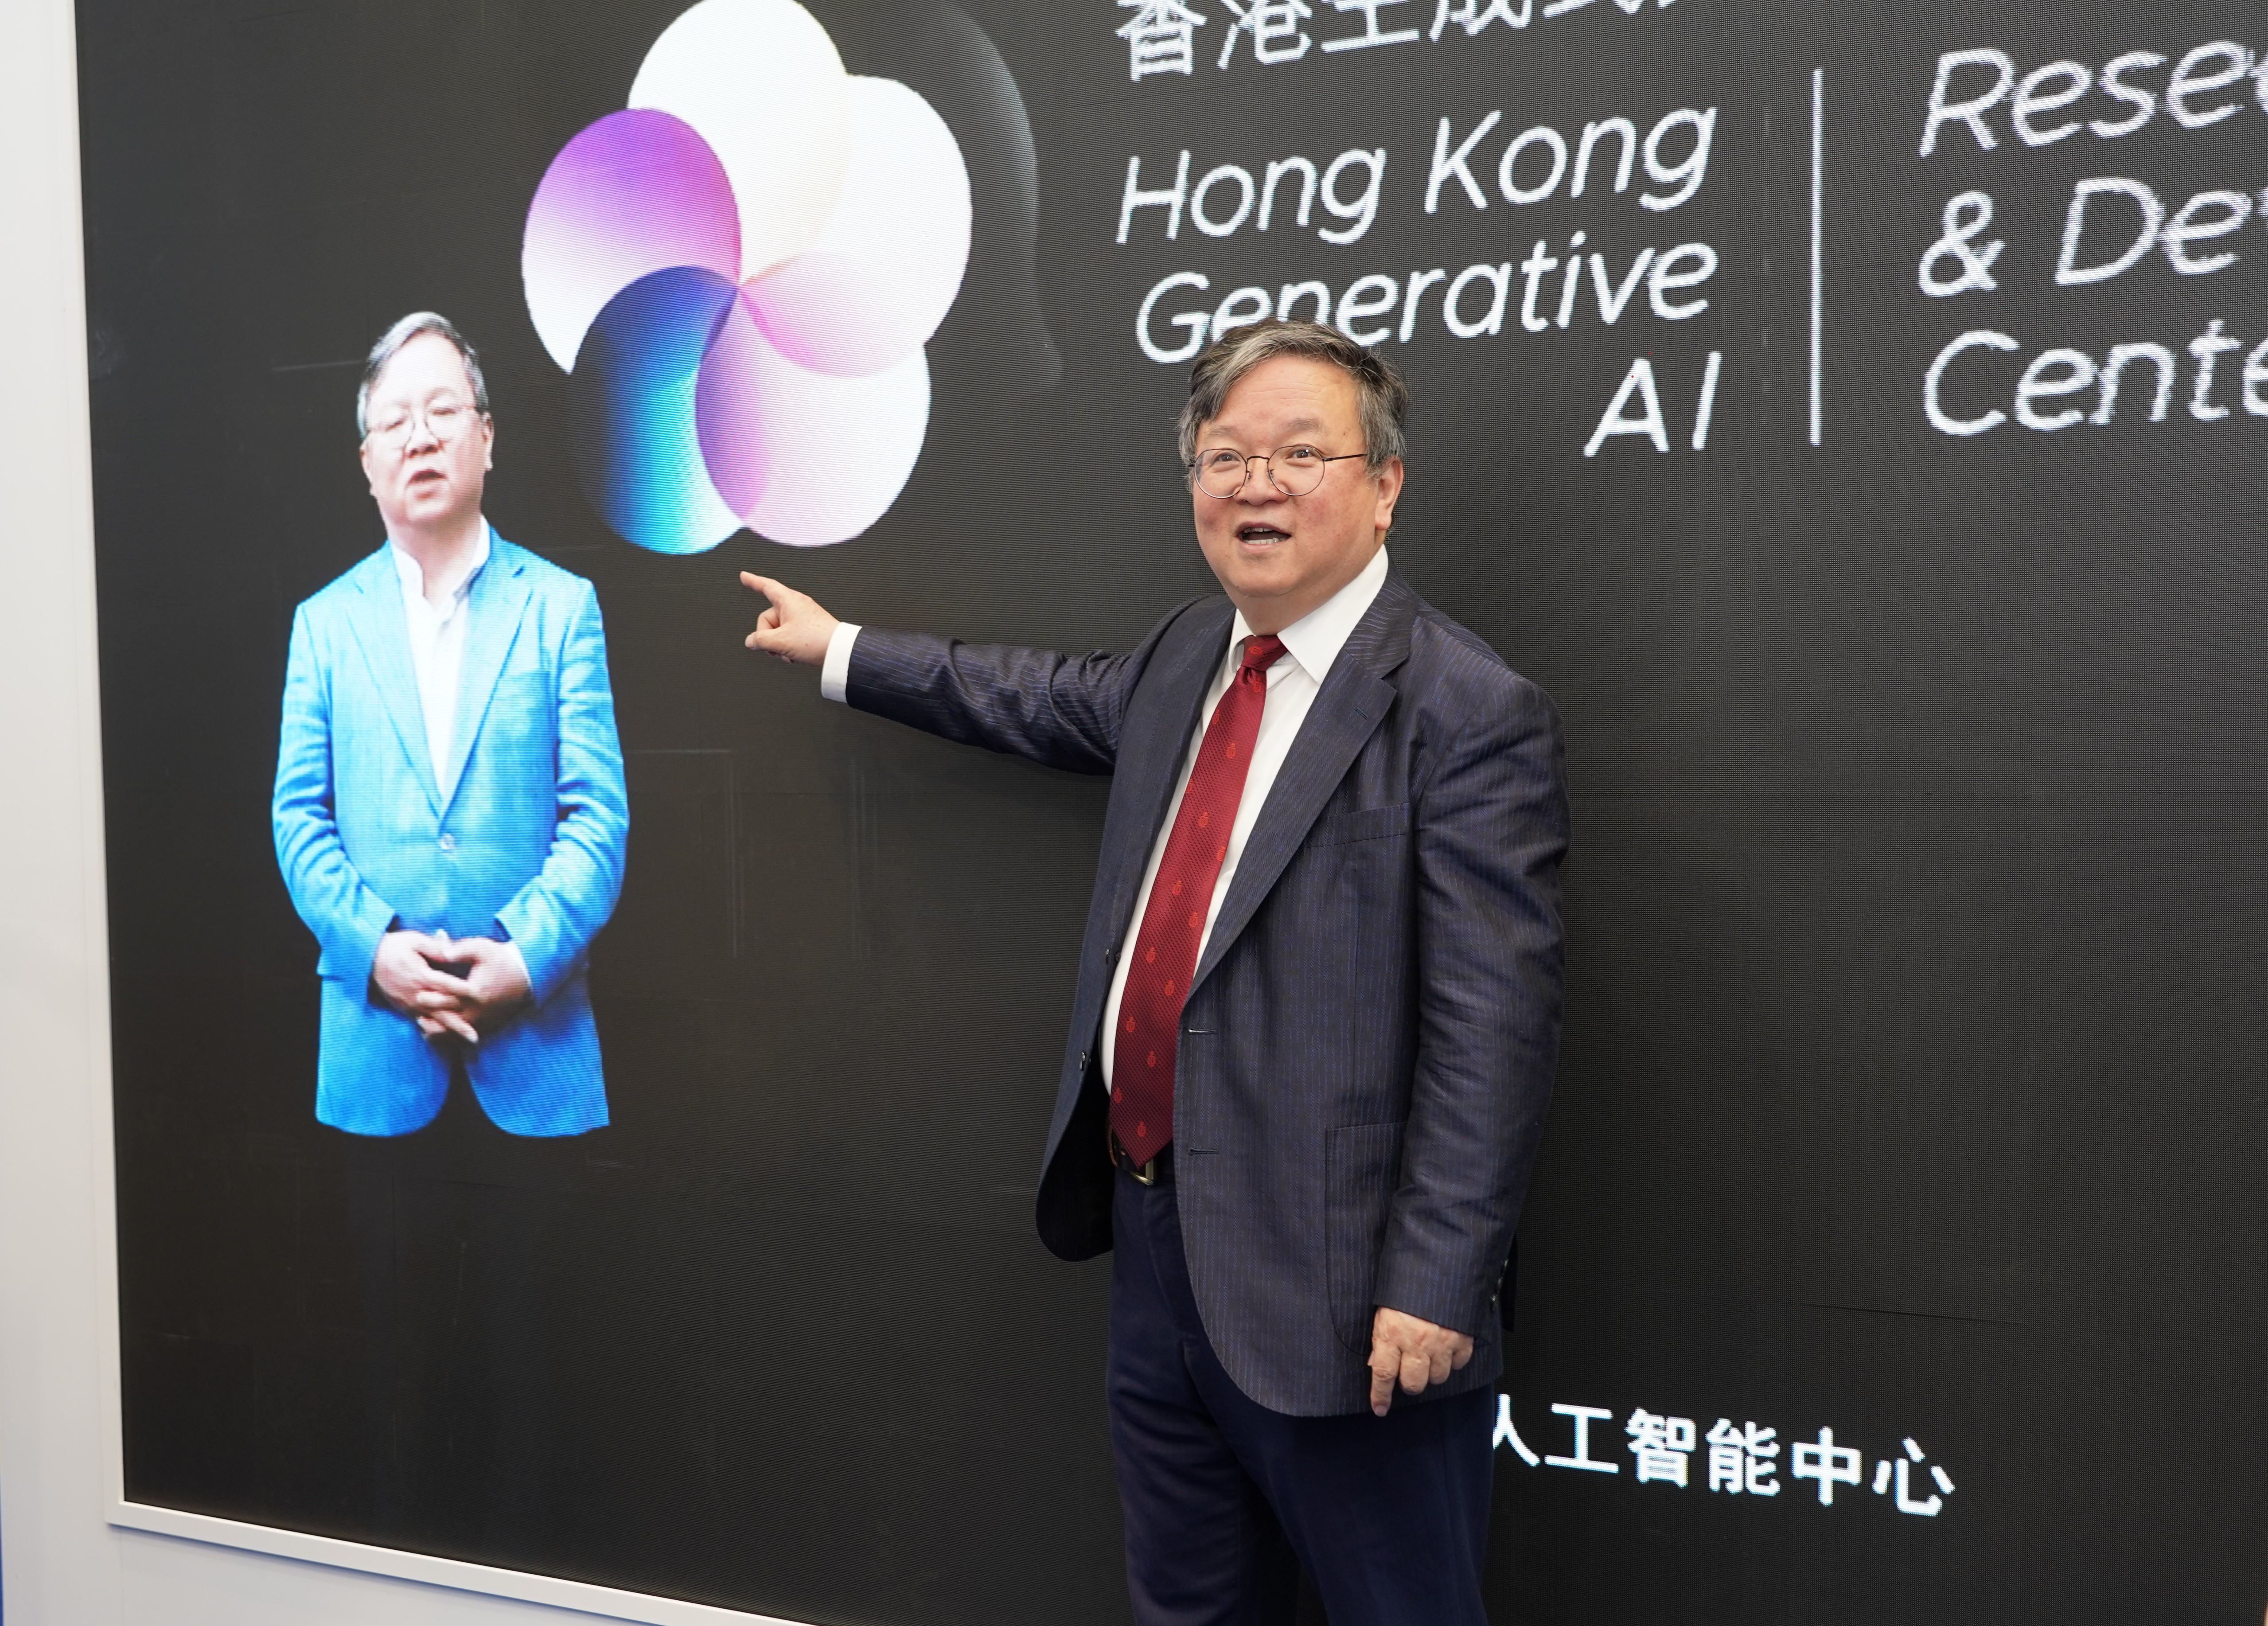 Prof. Guo and his AI-generated figure in the HKGAI introduction video.